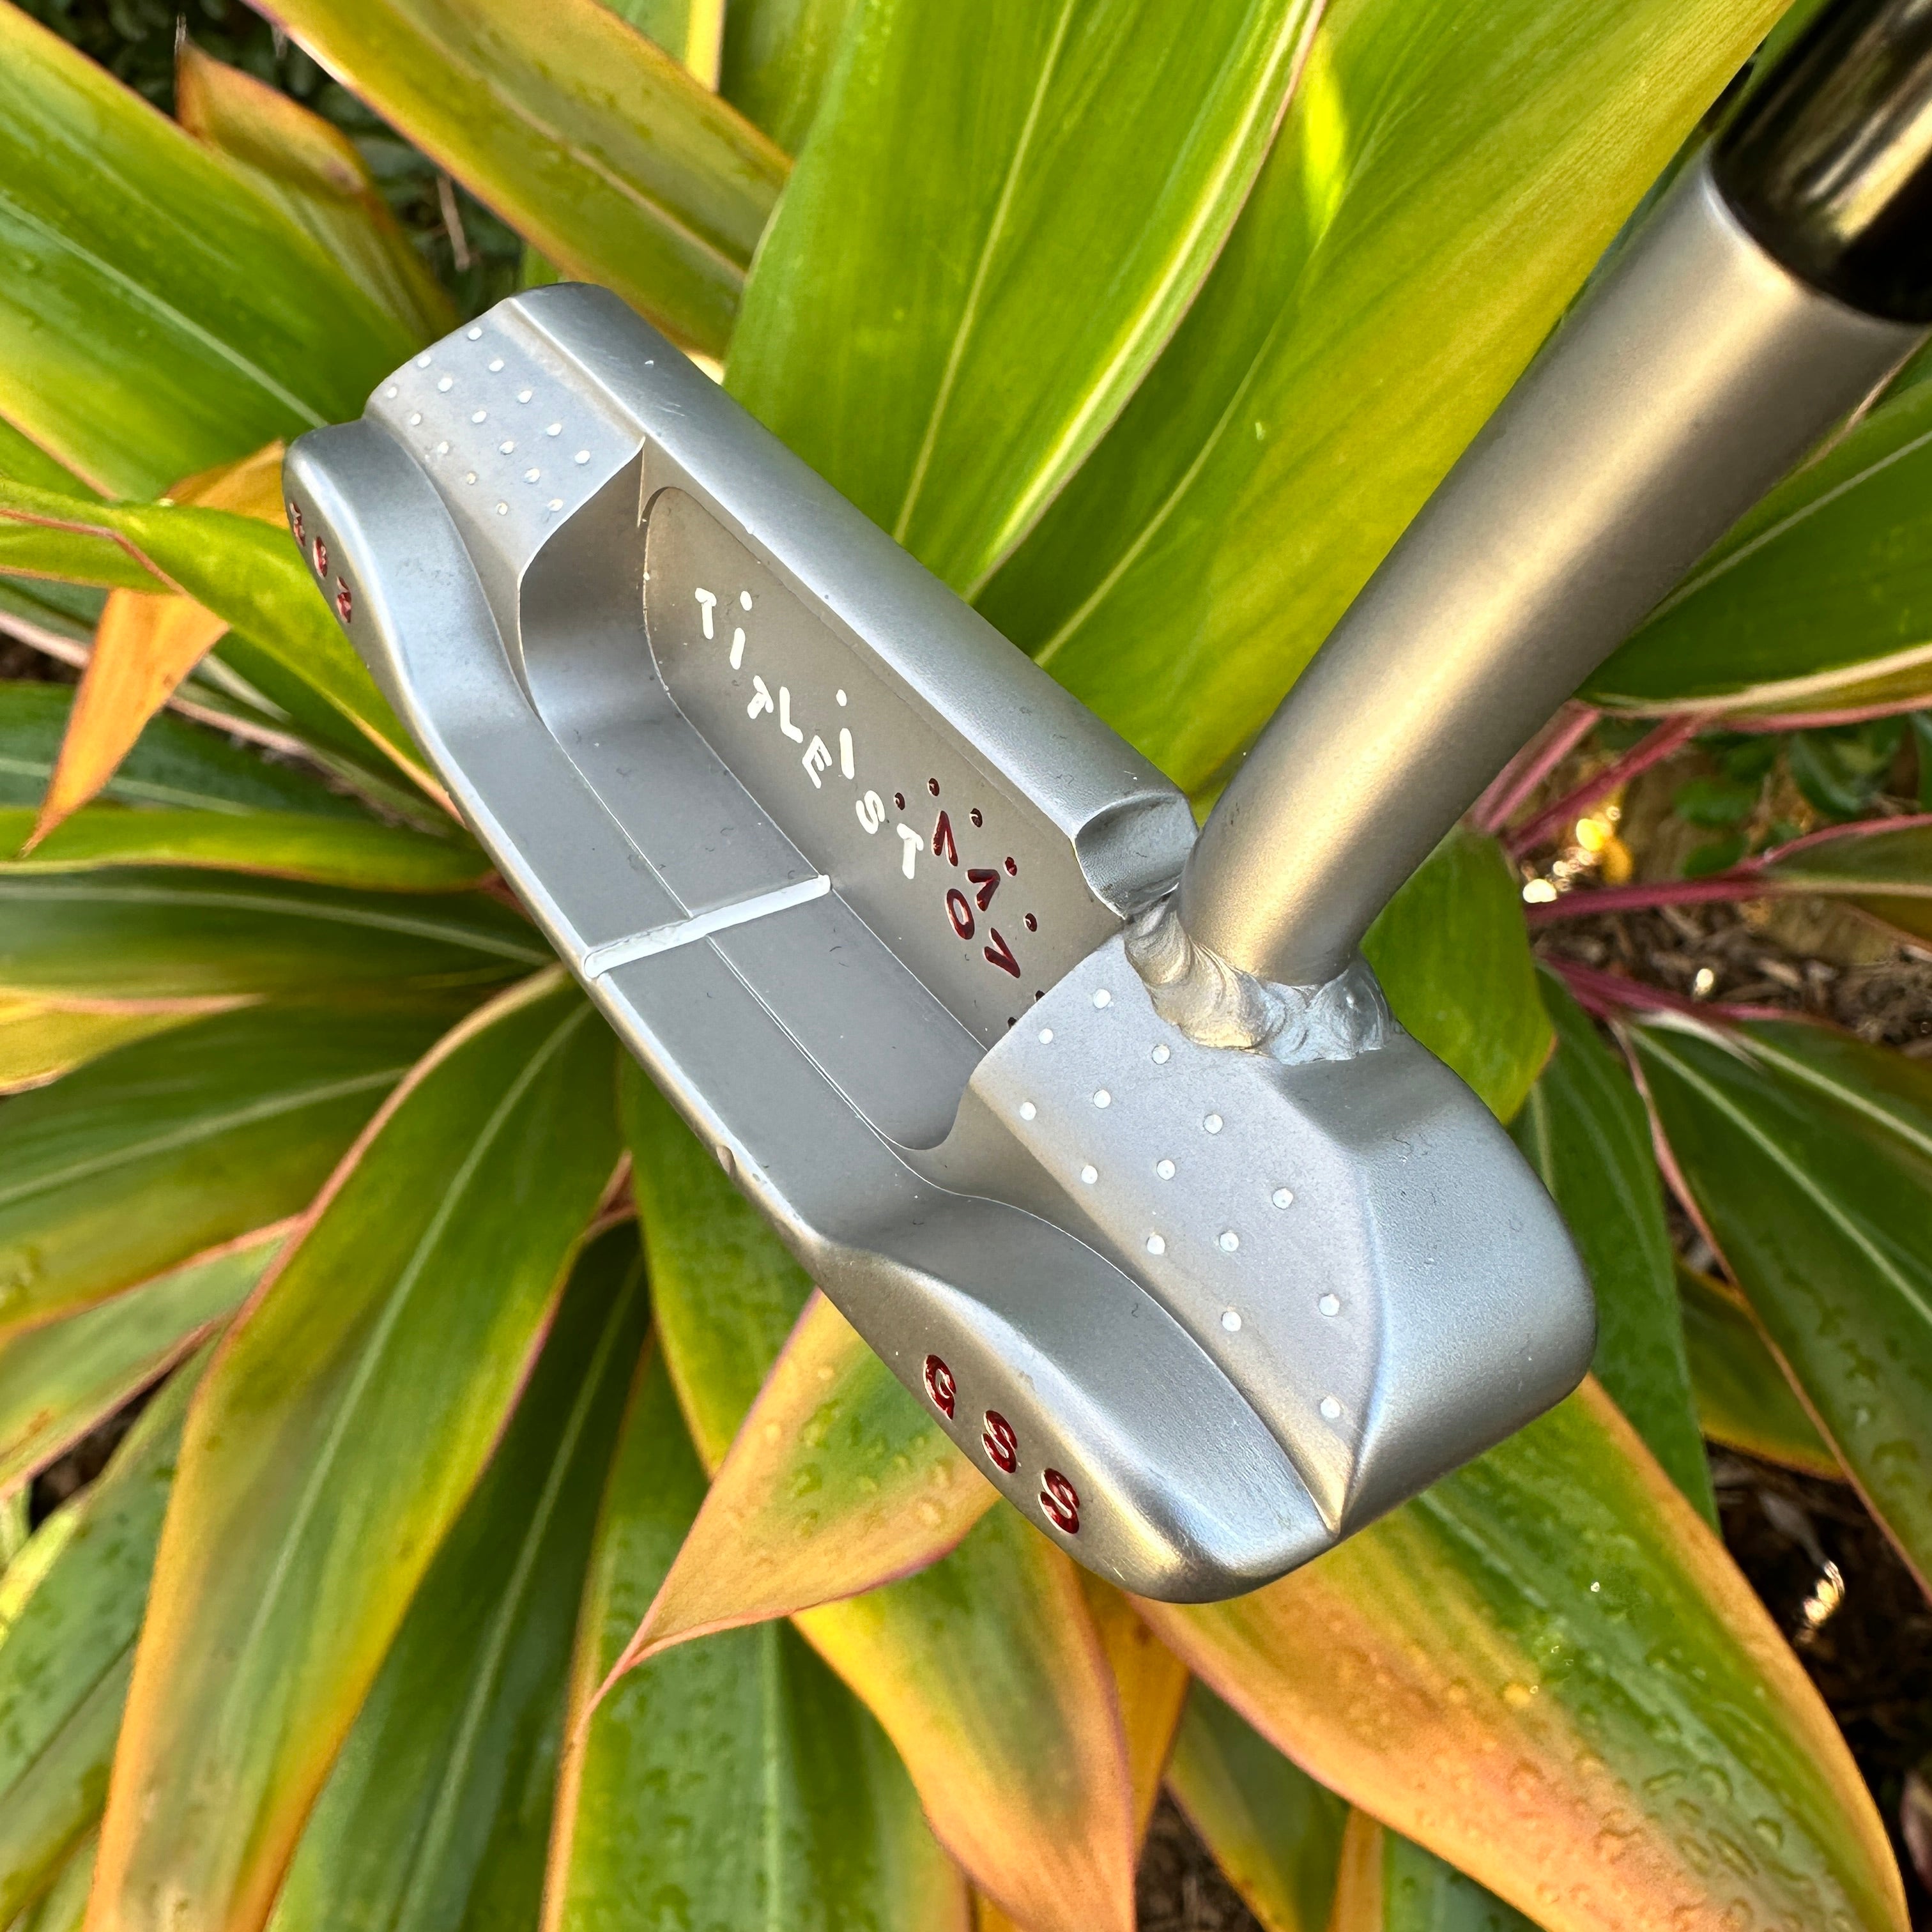 Left Handed GSS 009 1.5 Scotty Cameron Putter